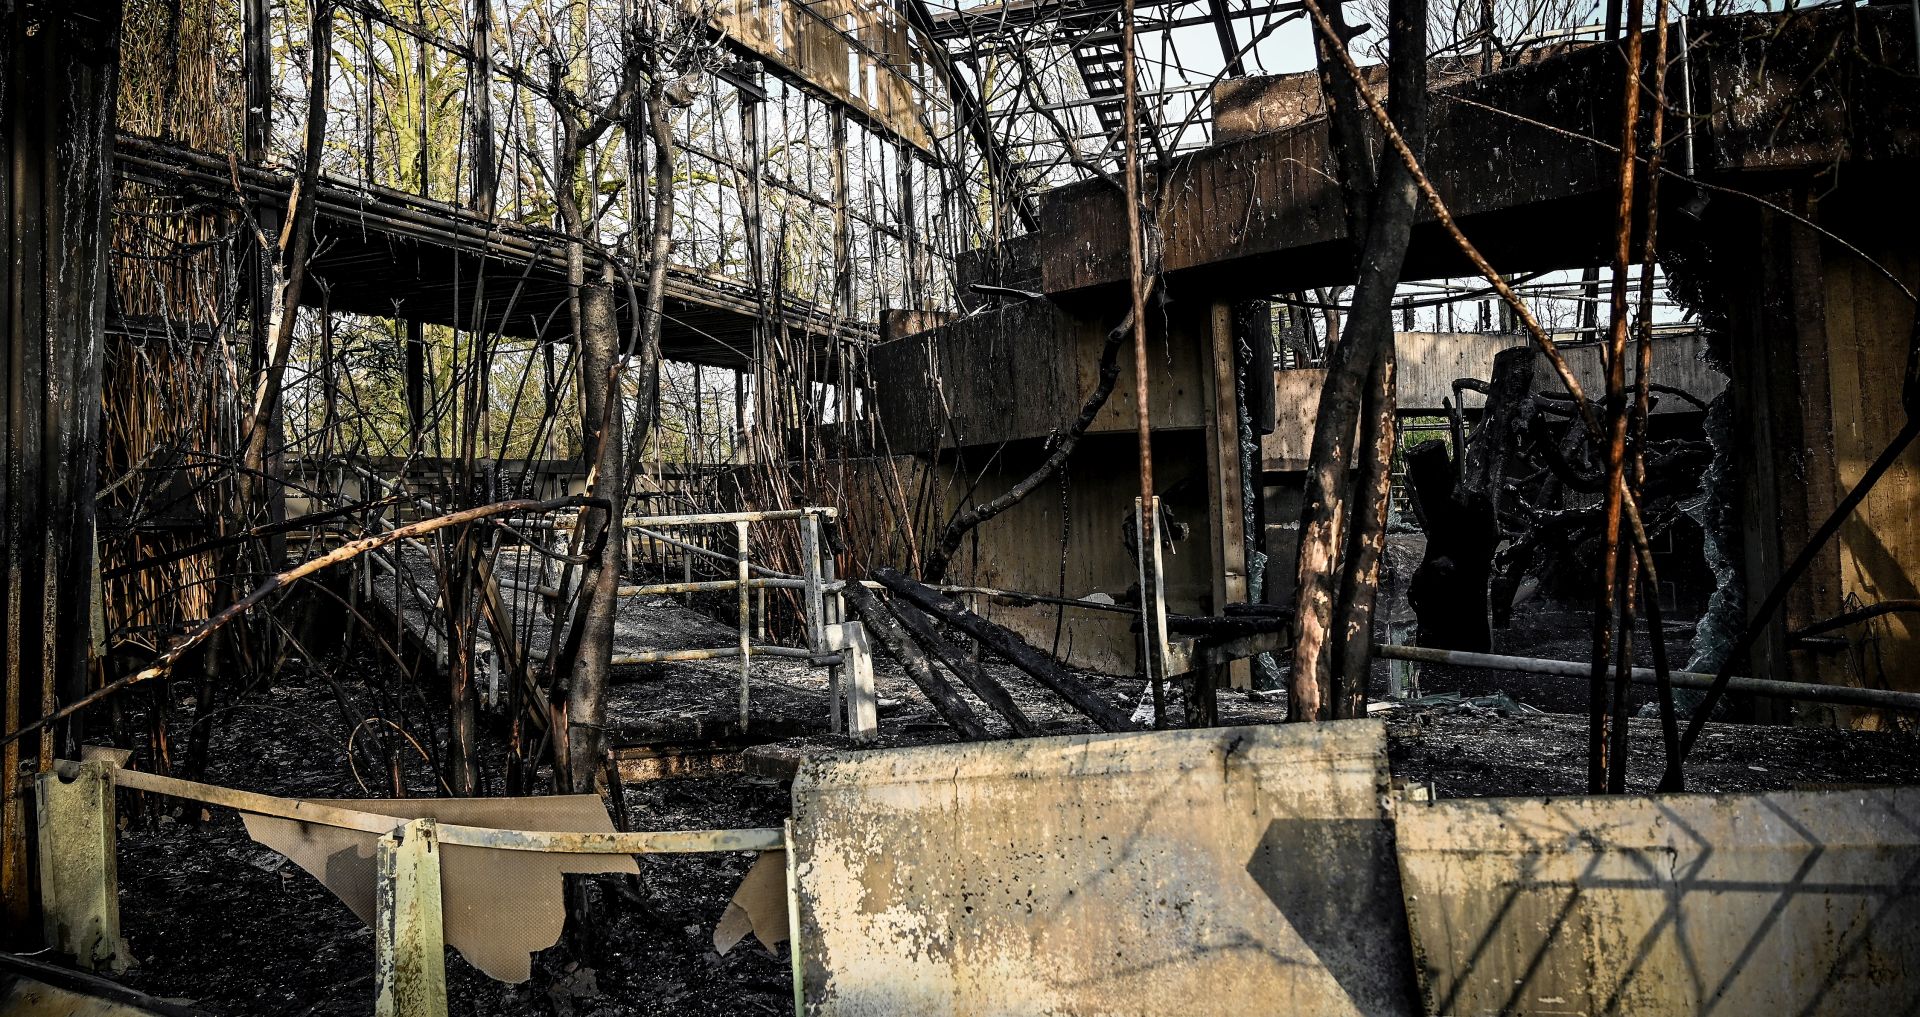 epa08097685 A general view of the completely burned out ape house of the zoo in Krefeld, Germany, 01 January 2020. All animals, in total more than 30, died during the fire at the Krefeld Zoo in the New Year's night. The dead animals include chimpanzees, orangutans and two older gorillas. The criminal police in Krefeld currently assume that so-called sky lanterns may have set the monkey house on fire on New Year's Eve. According to reports, eye-witnesses had seen sky lanterns land on the roof of the building.  EPA/SASCHA STEINBACH